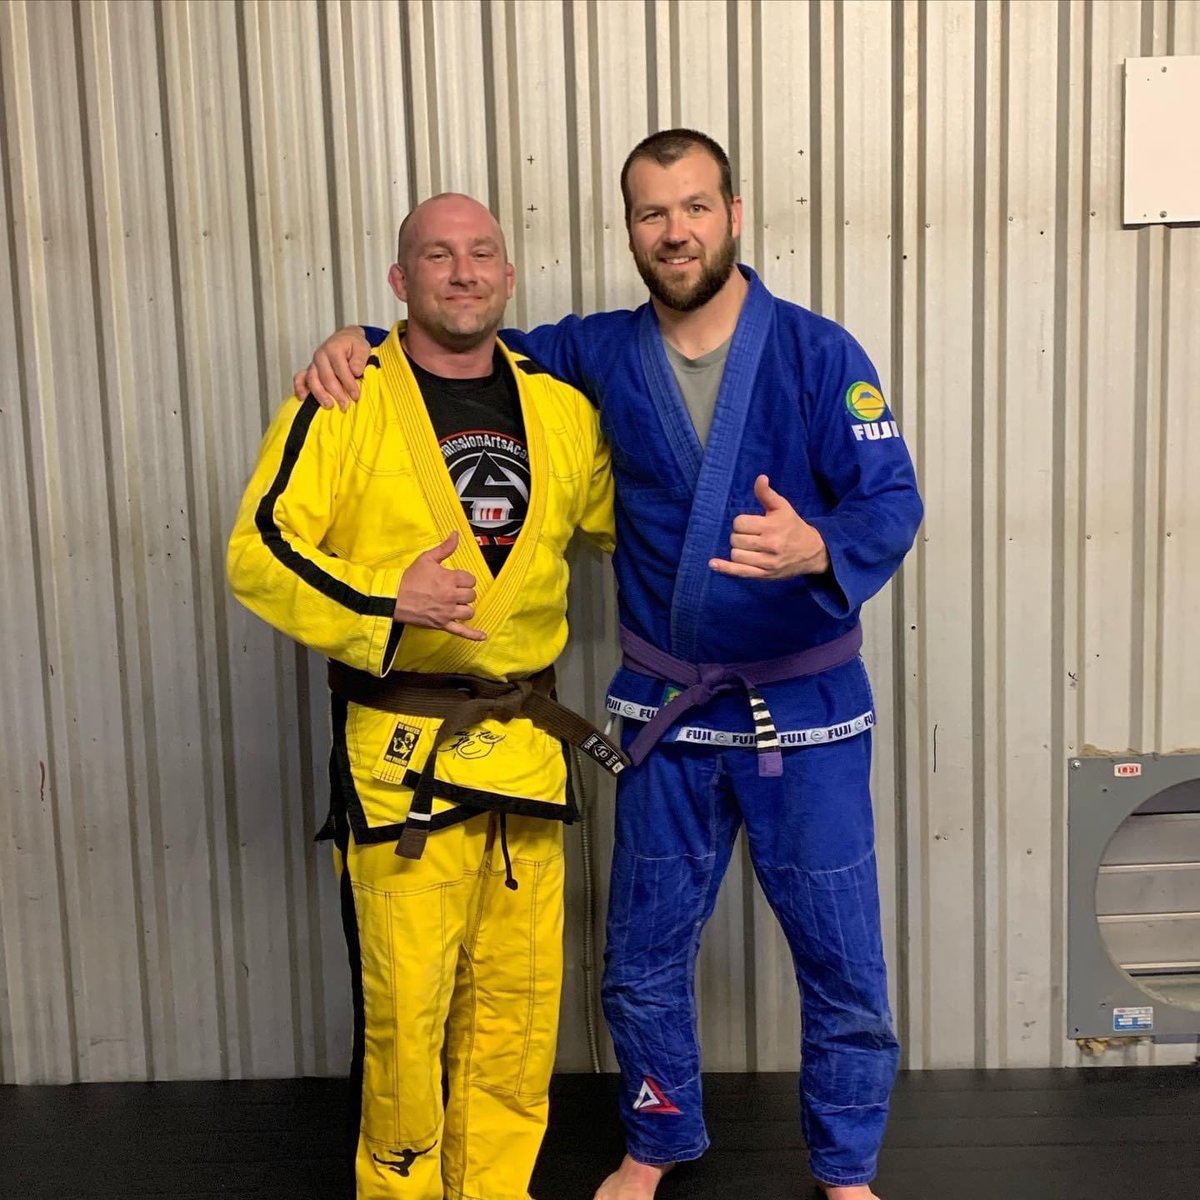 Awesome training tonight. When you find a guy who routinely kicks your ass keep training with him to become your best self. Definitely got beat up tonight. #GOOD #BJJ #Copswhotrain #Trainingformentalhealth #catchascatchcan #gameofdeath #killbill #Covidisawork